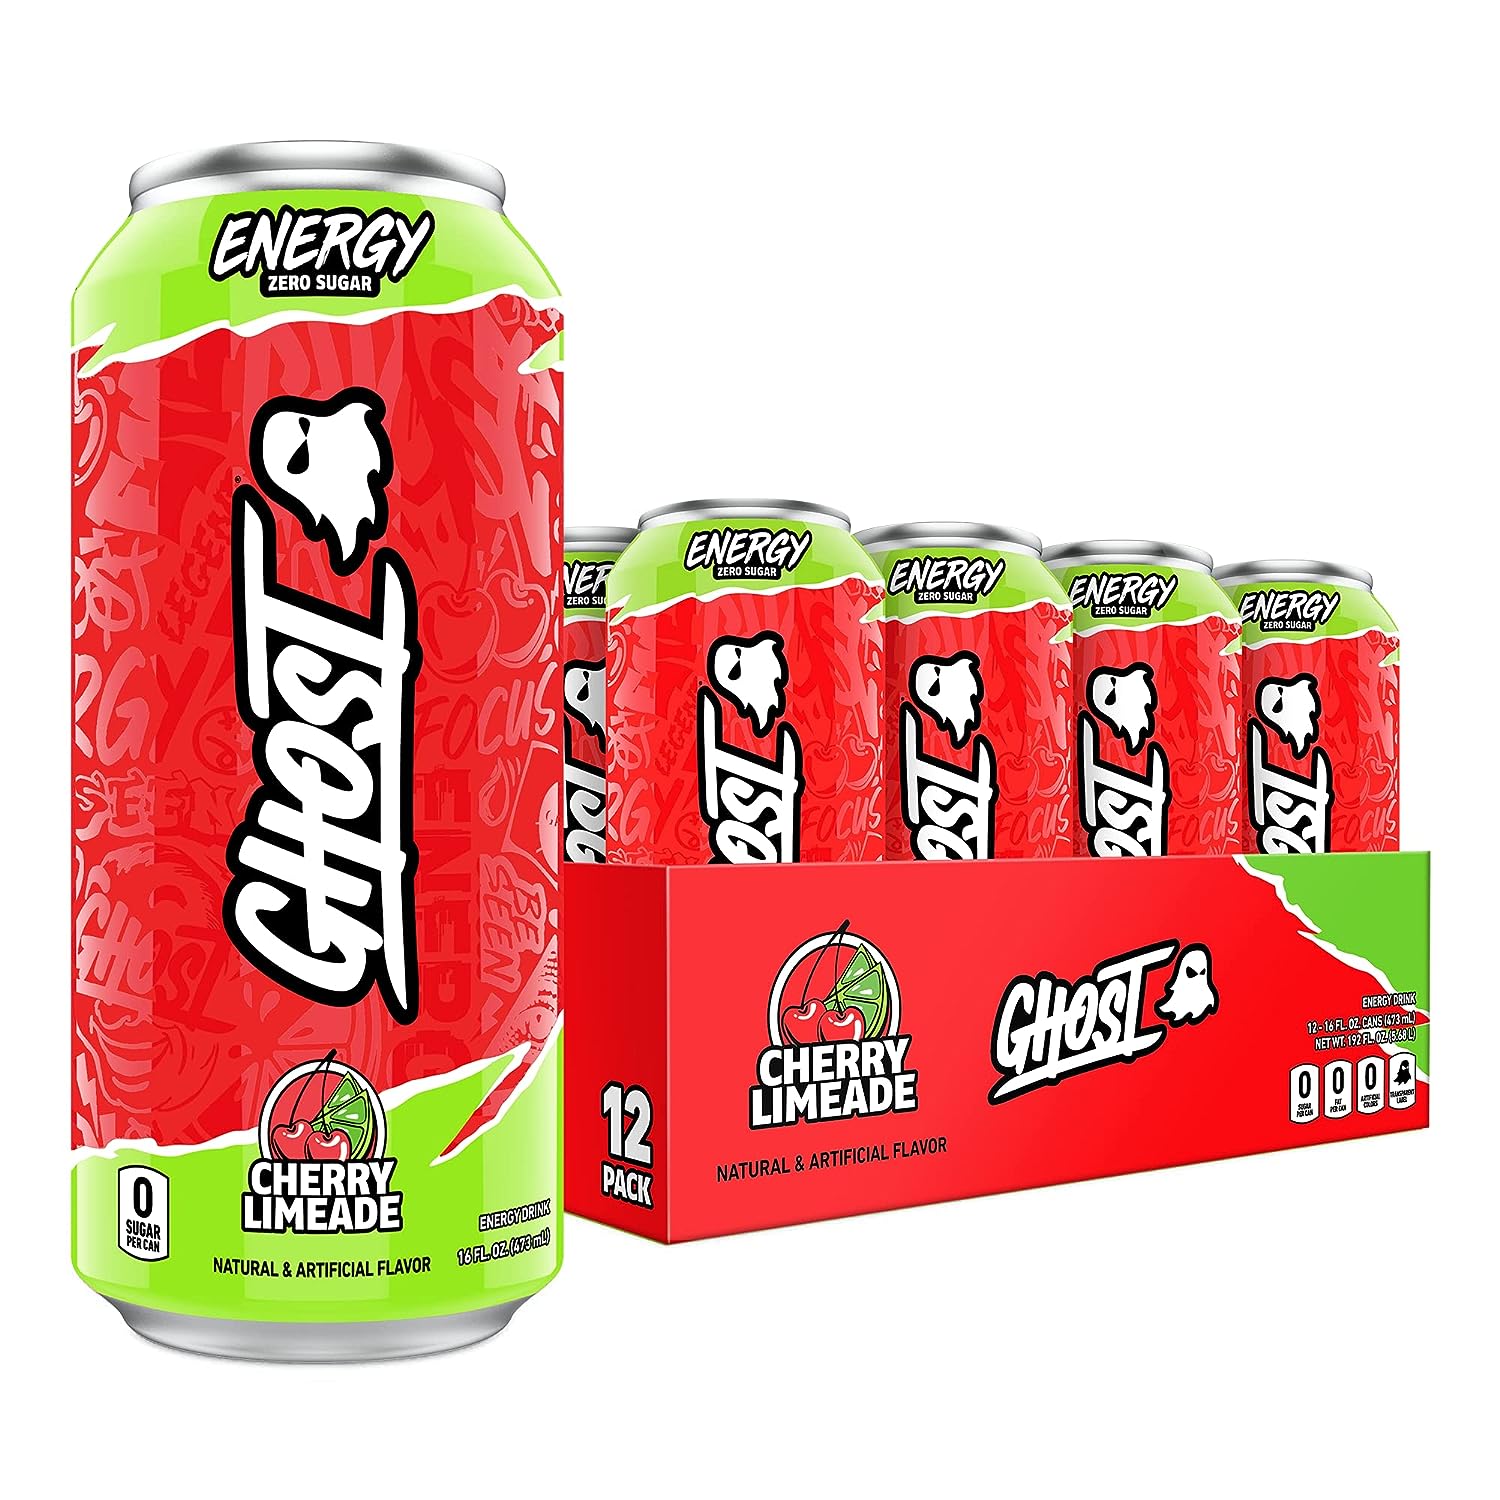 GHOST Energy Drink (1 case of 12 cans) Protein Snacks Cherry Limeade GHOST